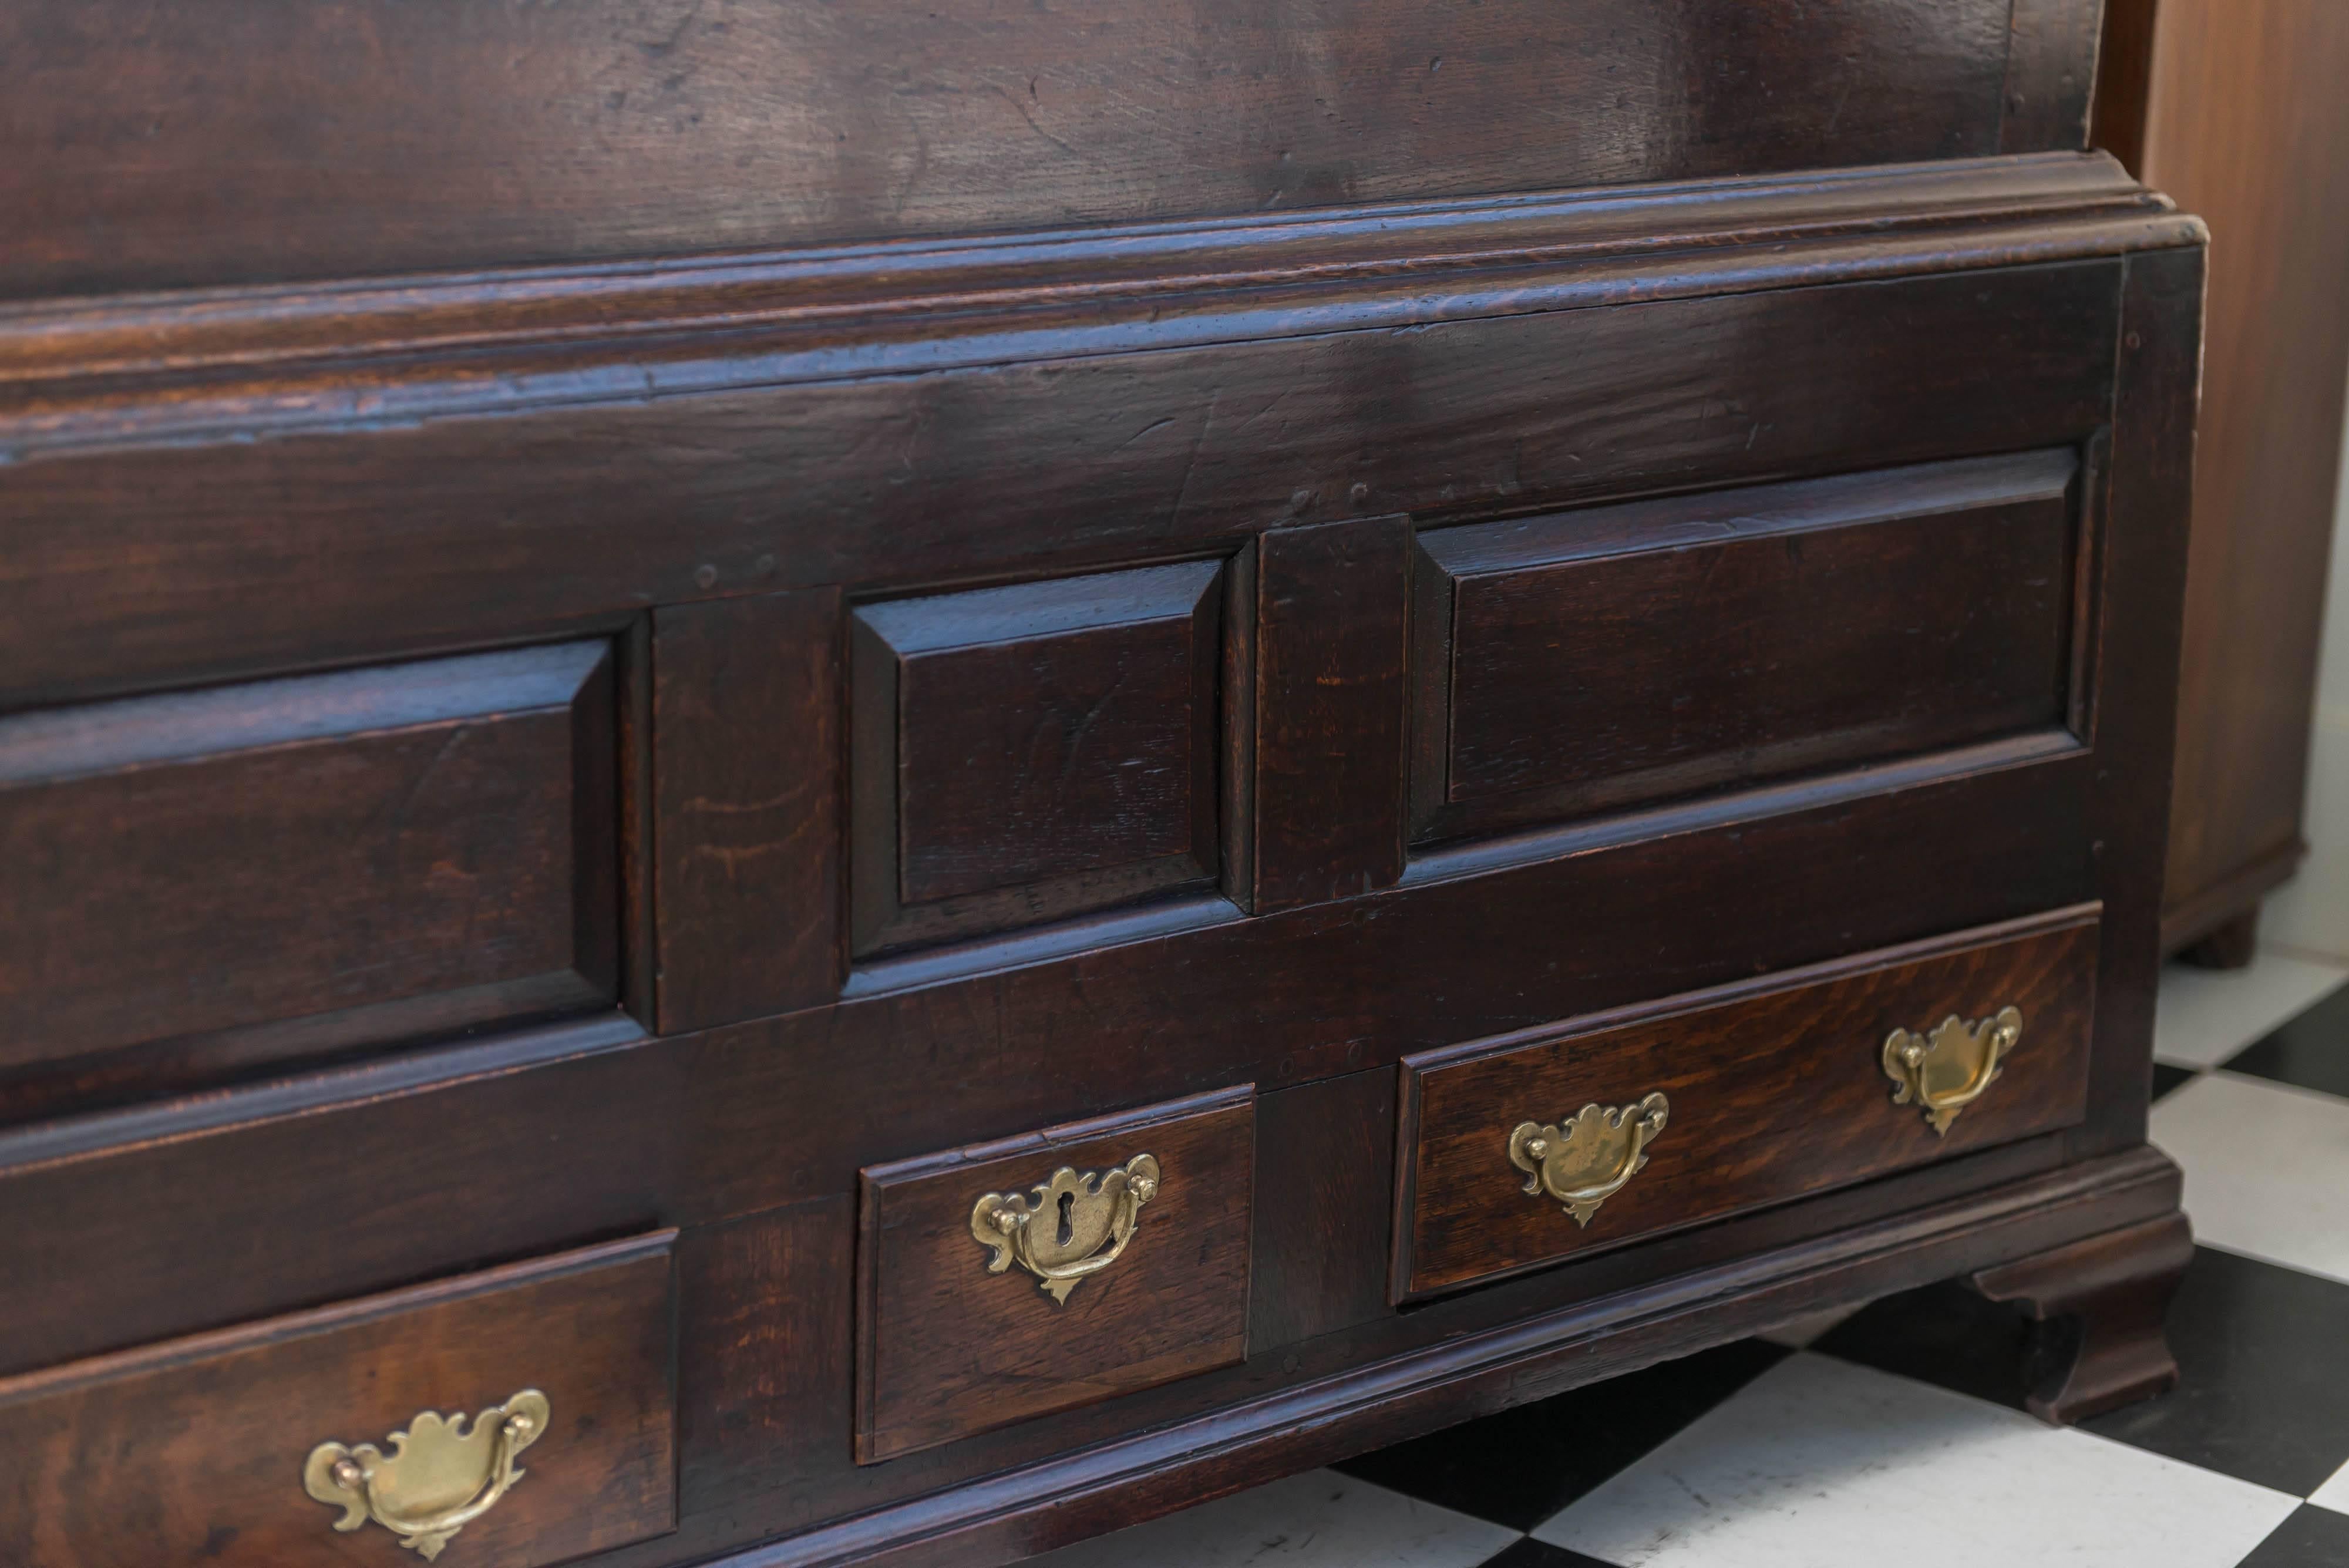 Late 18th century Georgian oak livery cabinet, circa 1780, George III period.
Livery is composed of two pieces. A cabinet above and bin plus drawers below.
Inside of the top cabinet the bottom shelf removes and there is a hidden bin below (between